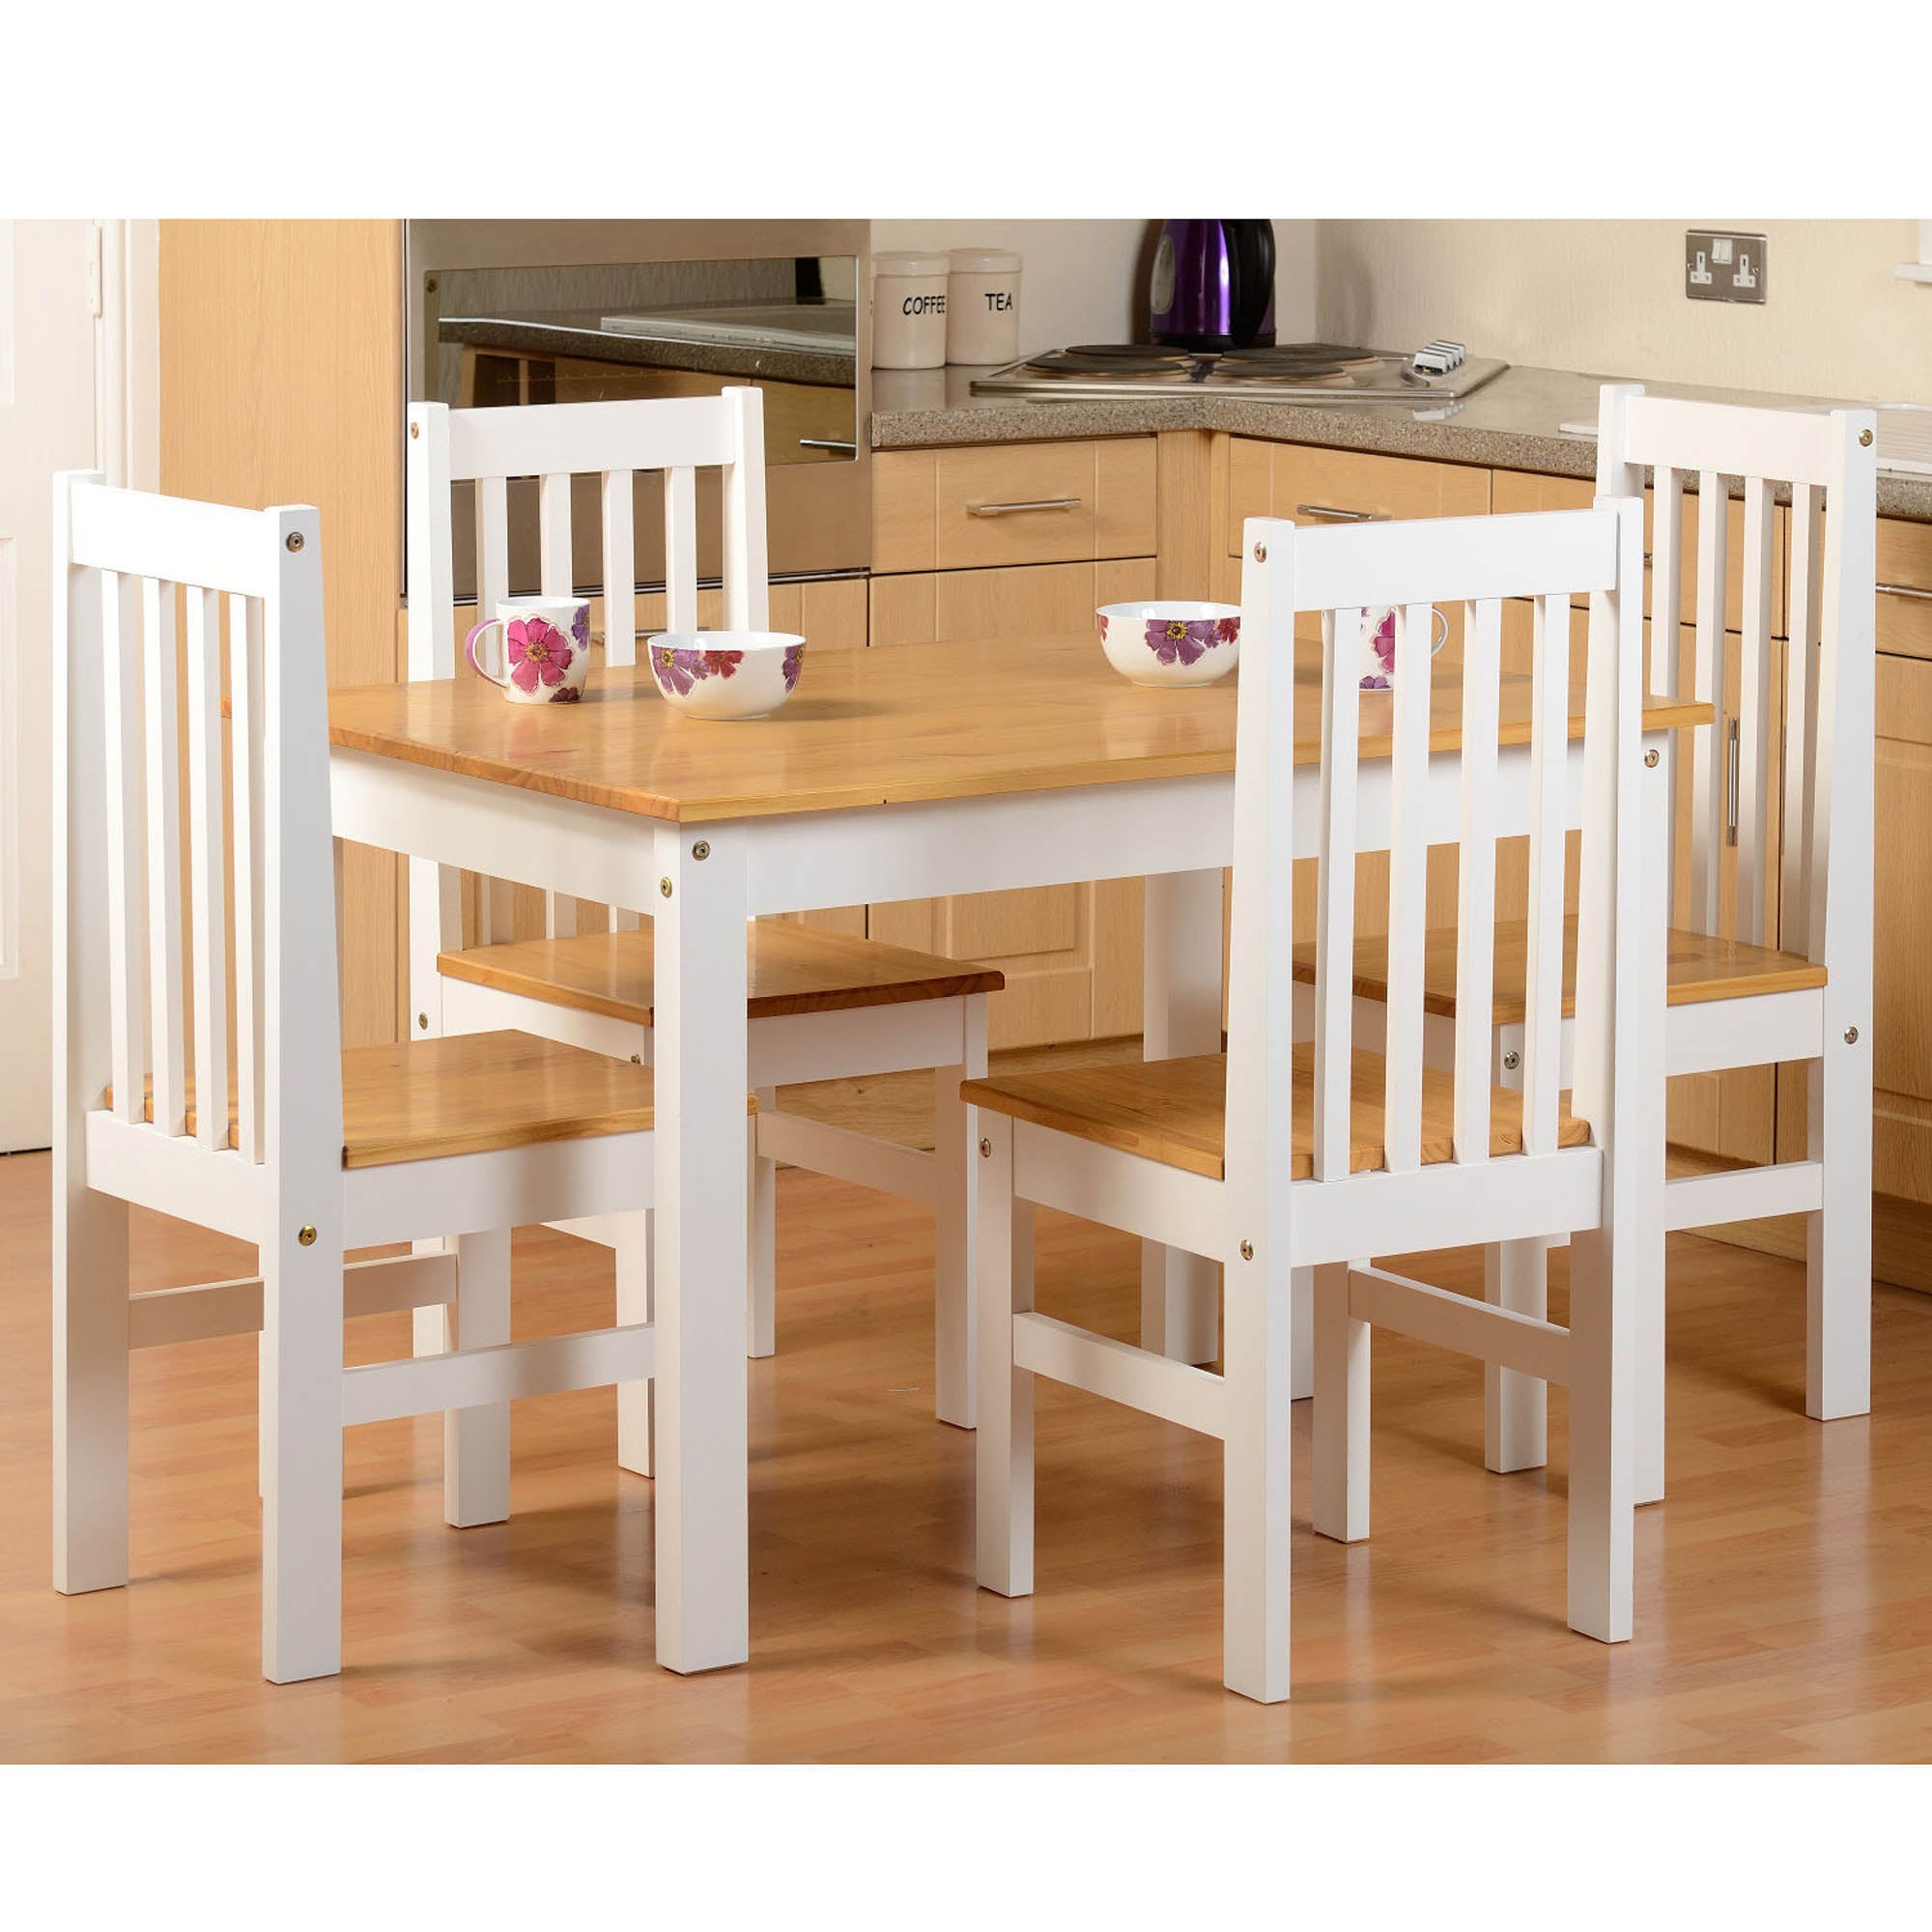 Ludlow Rectangular Dining Table with 4 Chairs, White White